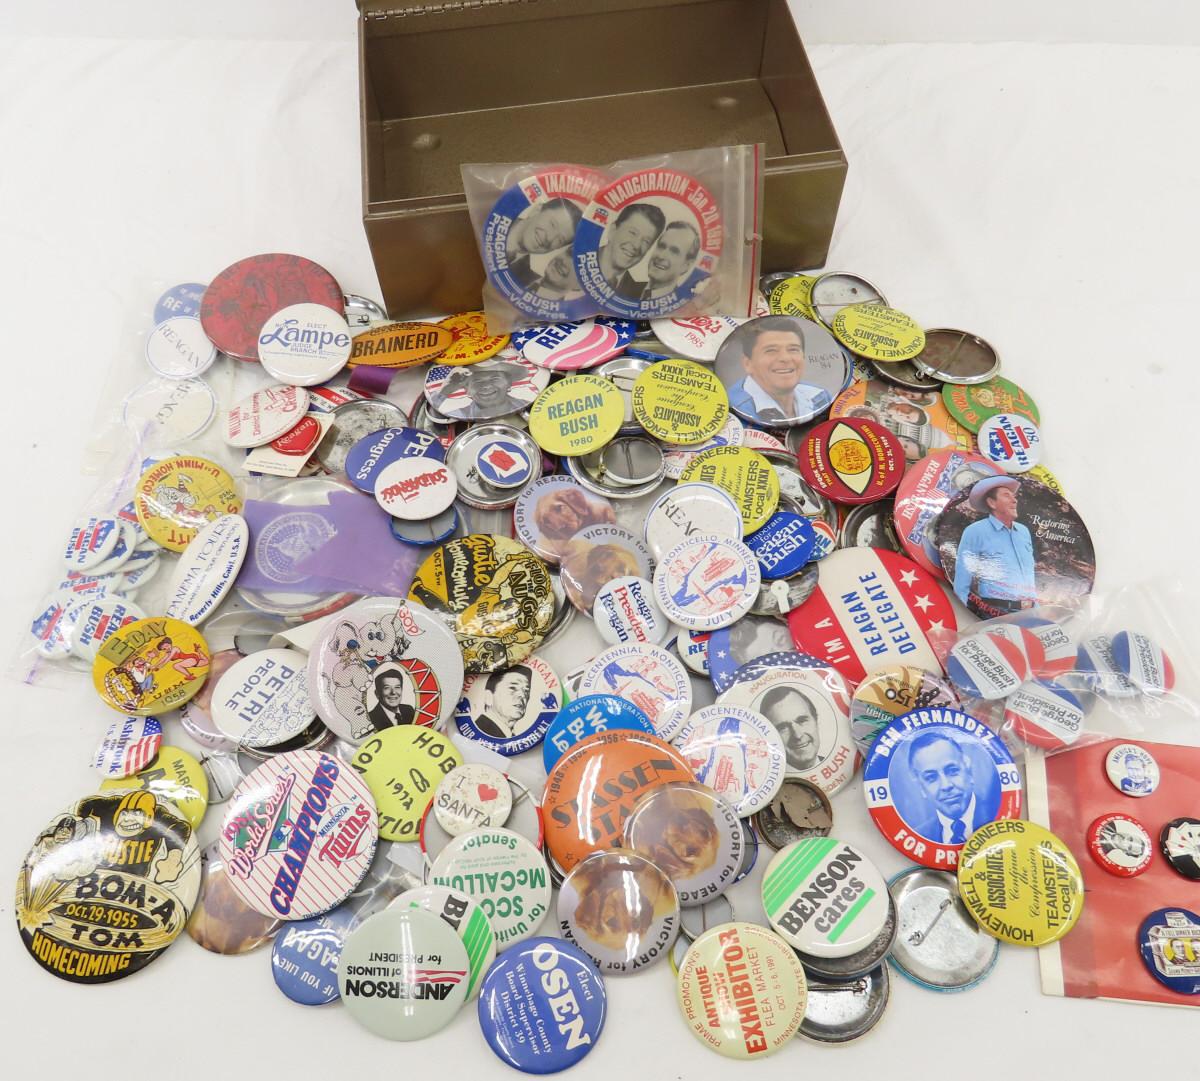 Vintage Political and Other Pin Backs